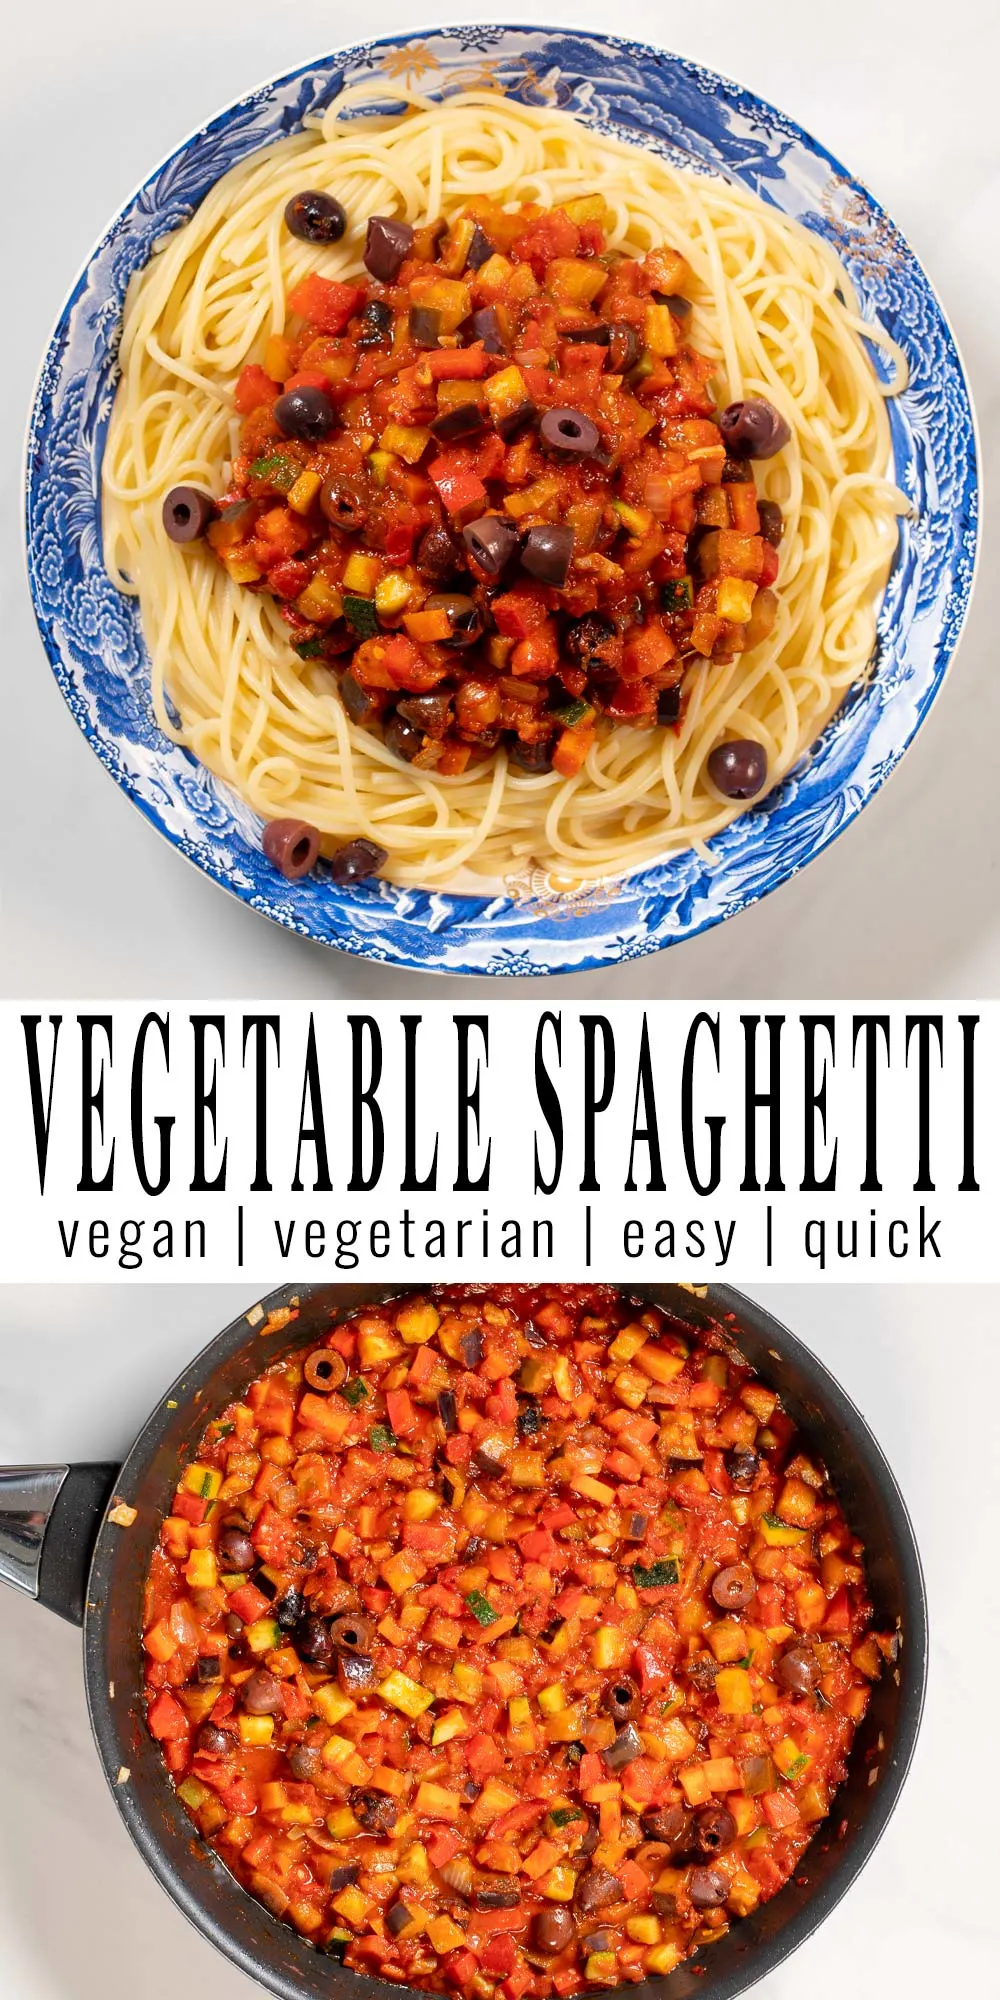 Collage of two pictures of Vegetable Spaghetti with recipe title text.